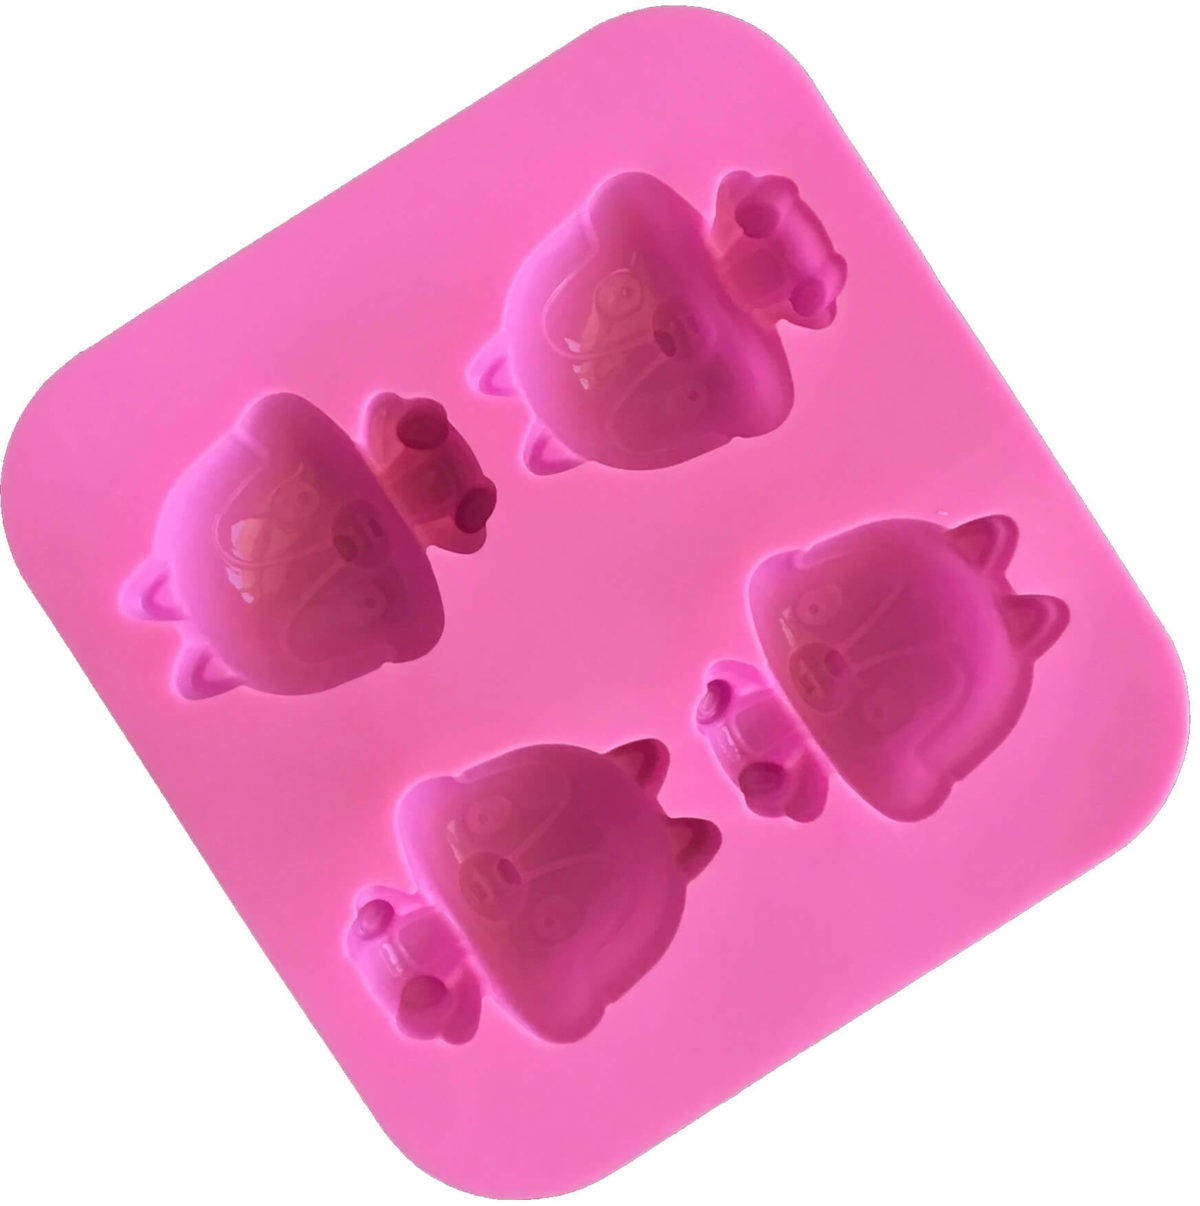 back of pink silicone mould with four identical cavities displaying a cartoon chipmunk